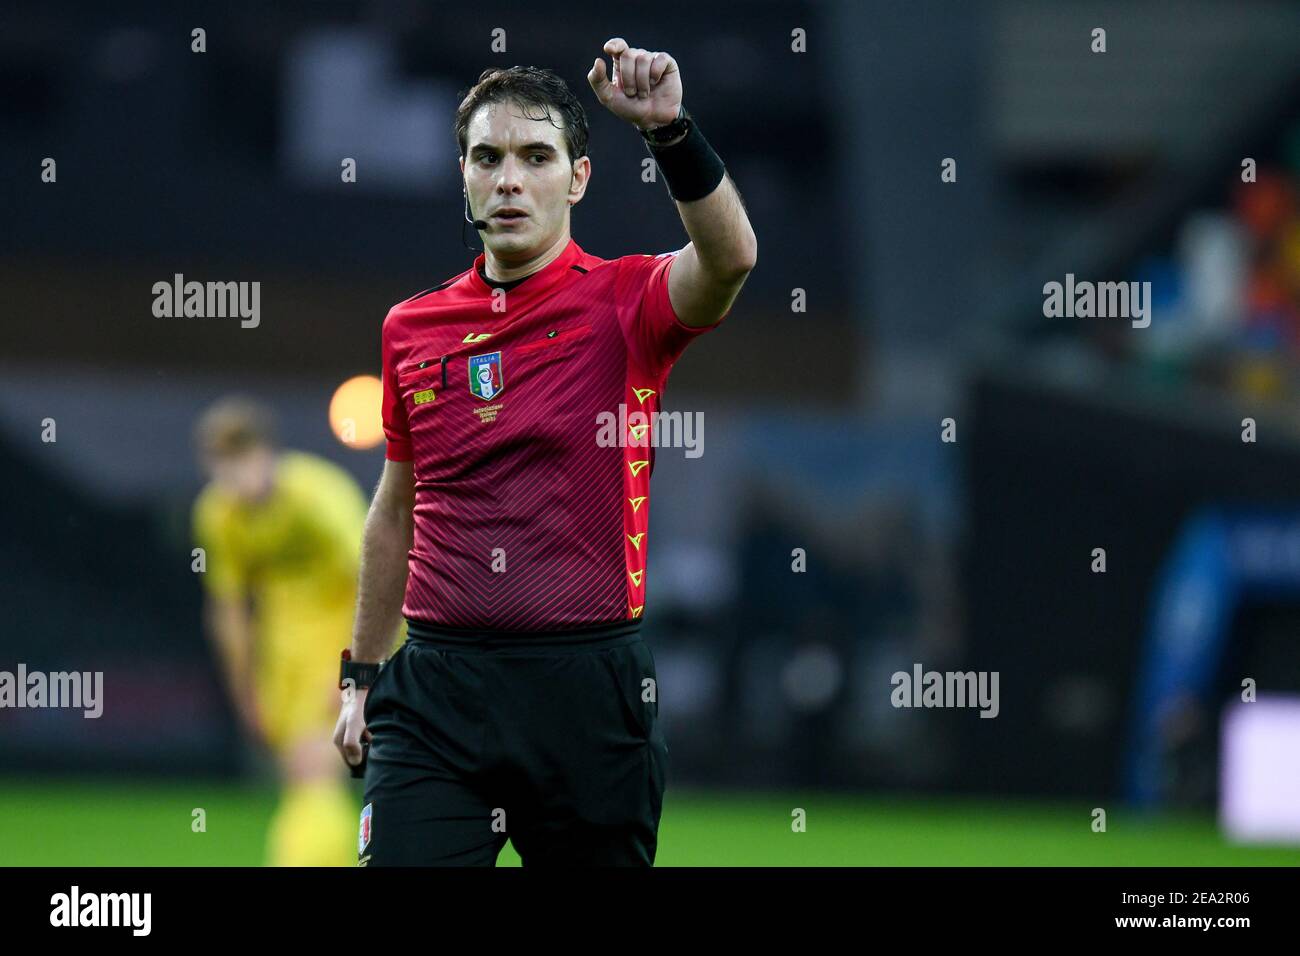 Udine, Italy. 07th Feb, 2021. the referee of the match Alberto Santoro  during Udinese Calcio vs Hellas Verona FC, Italian football Serie A match  in Udine, Italy, February 07 2021 Credit: Independent